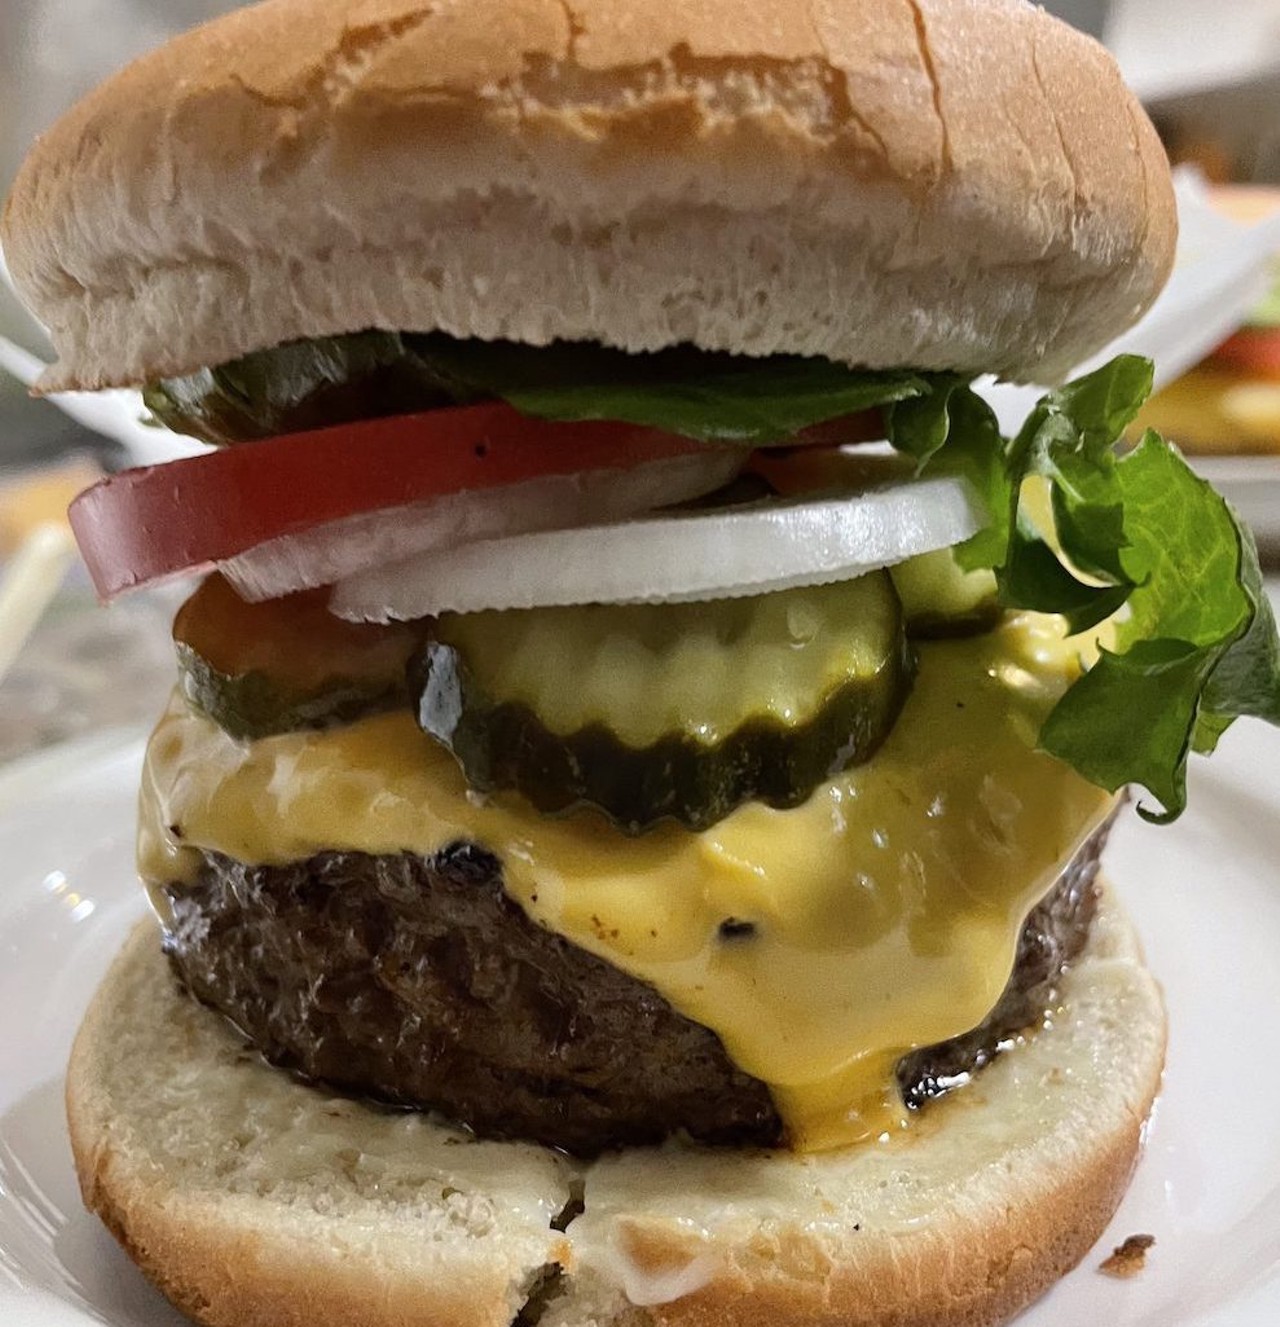 Bambi Bar
Our Signature Burger
Made with a 1/2 lb of fresh hand pattied meat, topped with American cheese, fresh veggies, lettuce, tomato, onion, pickles, and mayo.